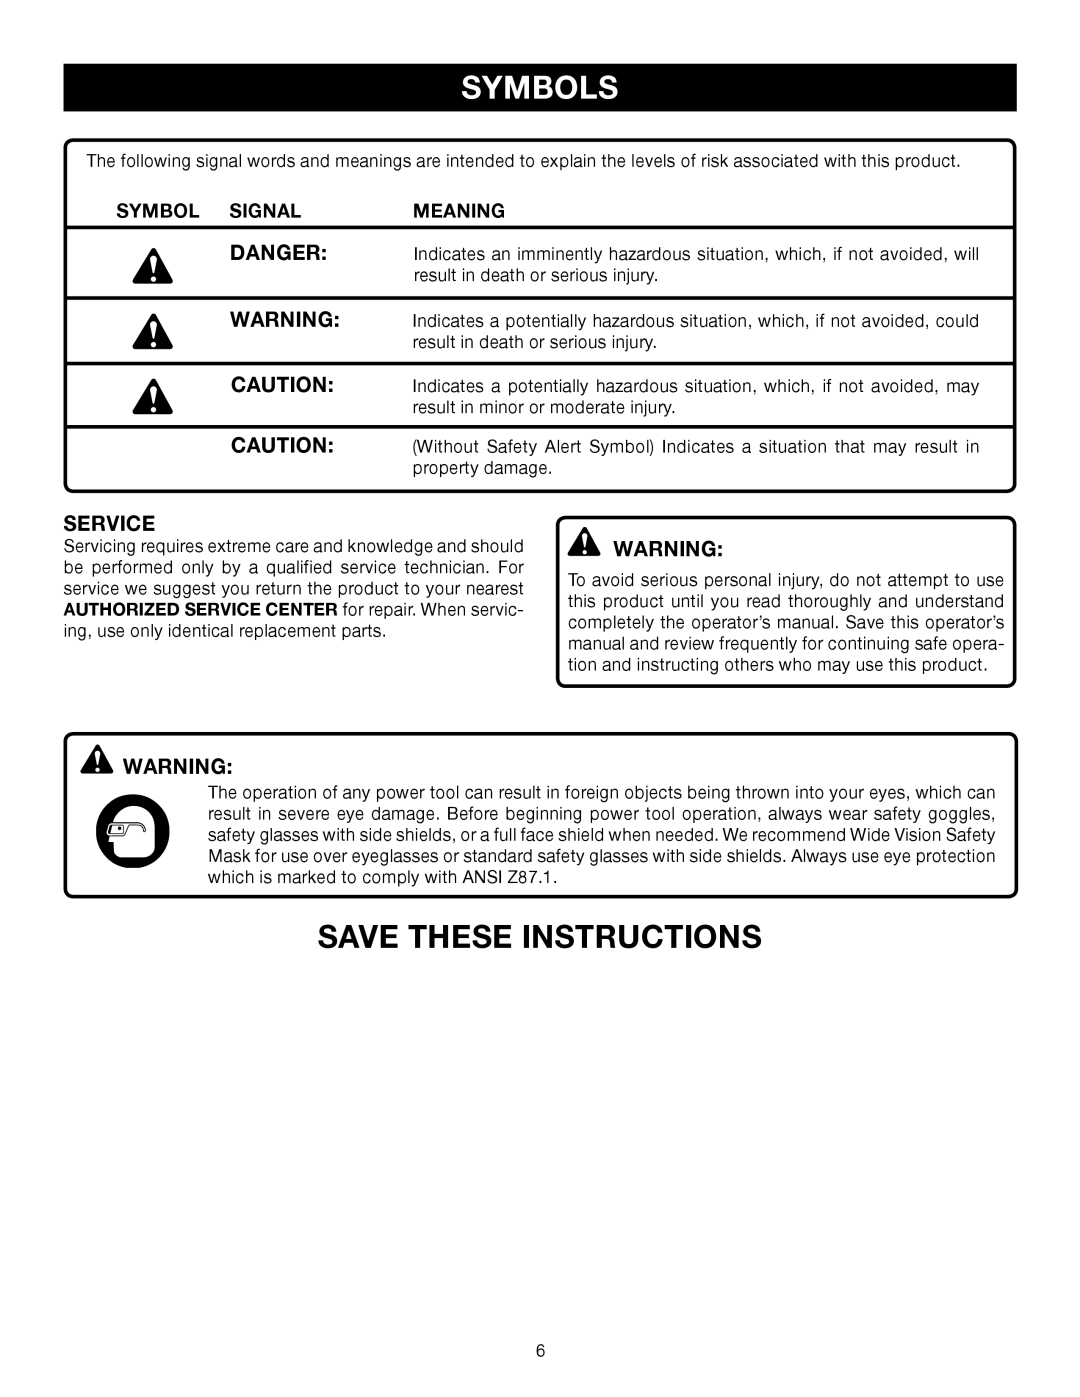 Ryobi Outdoor RY60511A manual Save These Instructions, Symbols, Service, Symbol Signal, Meaning 